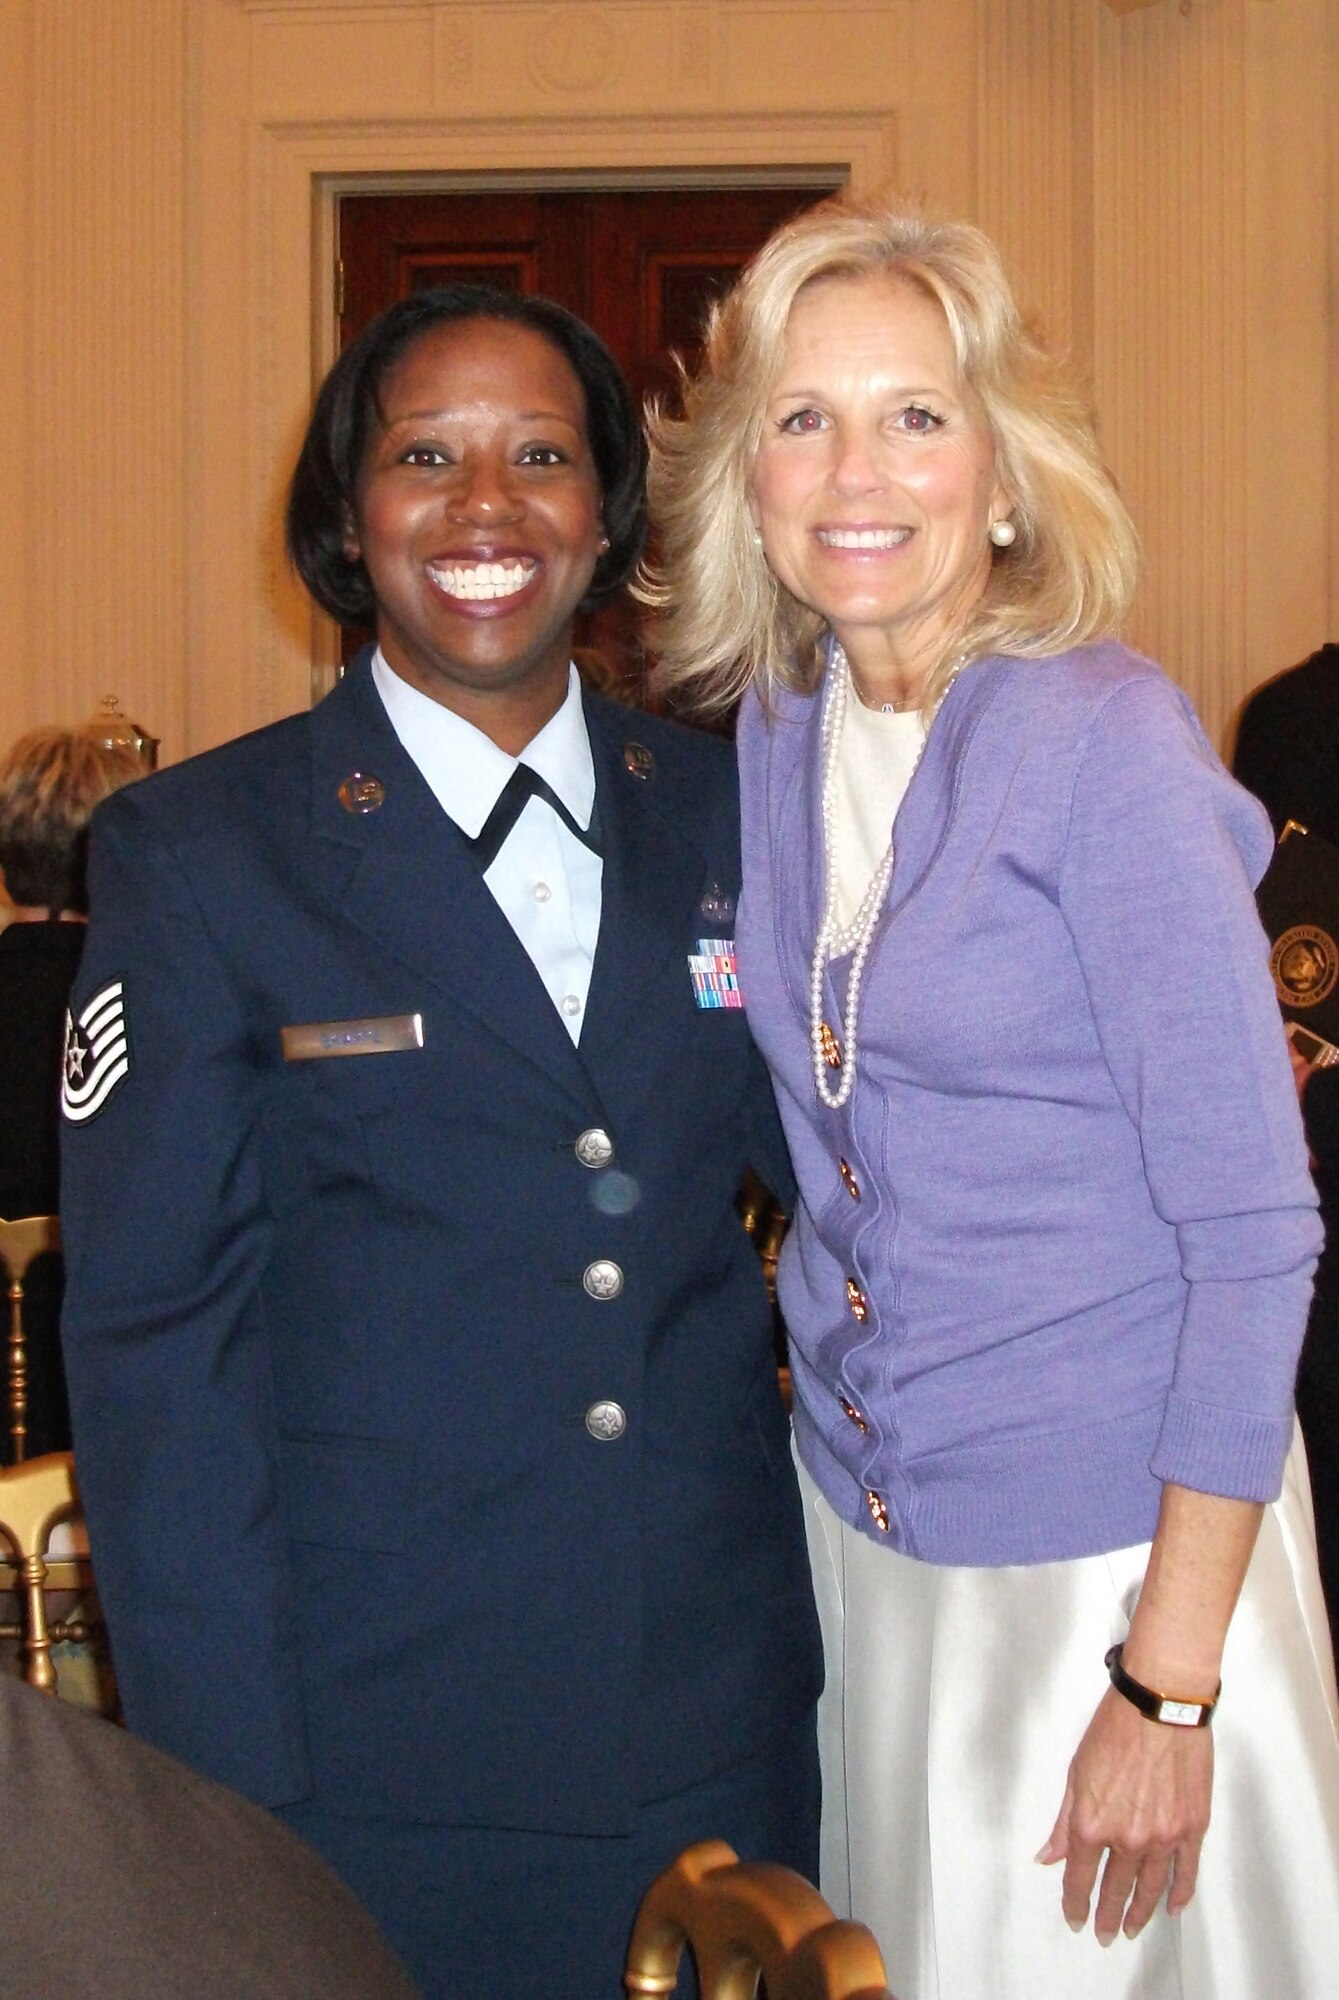 WASHINGTON -- Tech. Sgt. April M. Sharpe, the NCOIC of the client service center at The I.G. Brown Air National Guard Training and Education Center at McGhee Tyson ANGB, Tenn., poses with Dr. Jill Biden, wife of Vice President Joe Biden, at the White House during an event to honor women in the military, Nov. 18, 2009.  Tech. Sgt. Sharpe was one of four female enlisted members from the National Guard Bureau selected to attend the event hosted by First Lady Michelle Obama.  (U.S. Air Force photo by Chief Master Sgt. Chris Muncy)